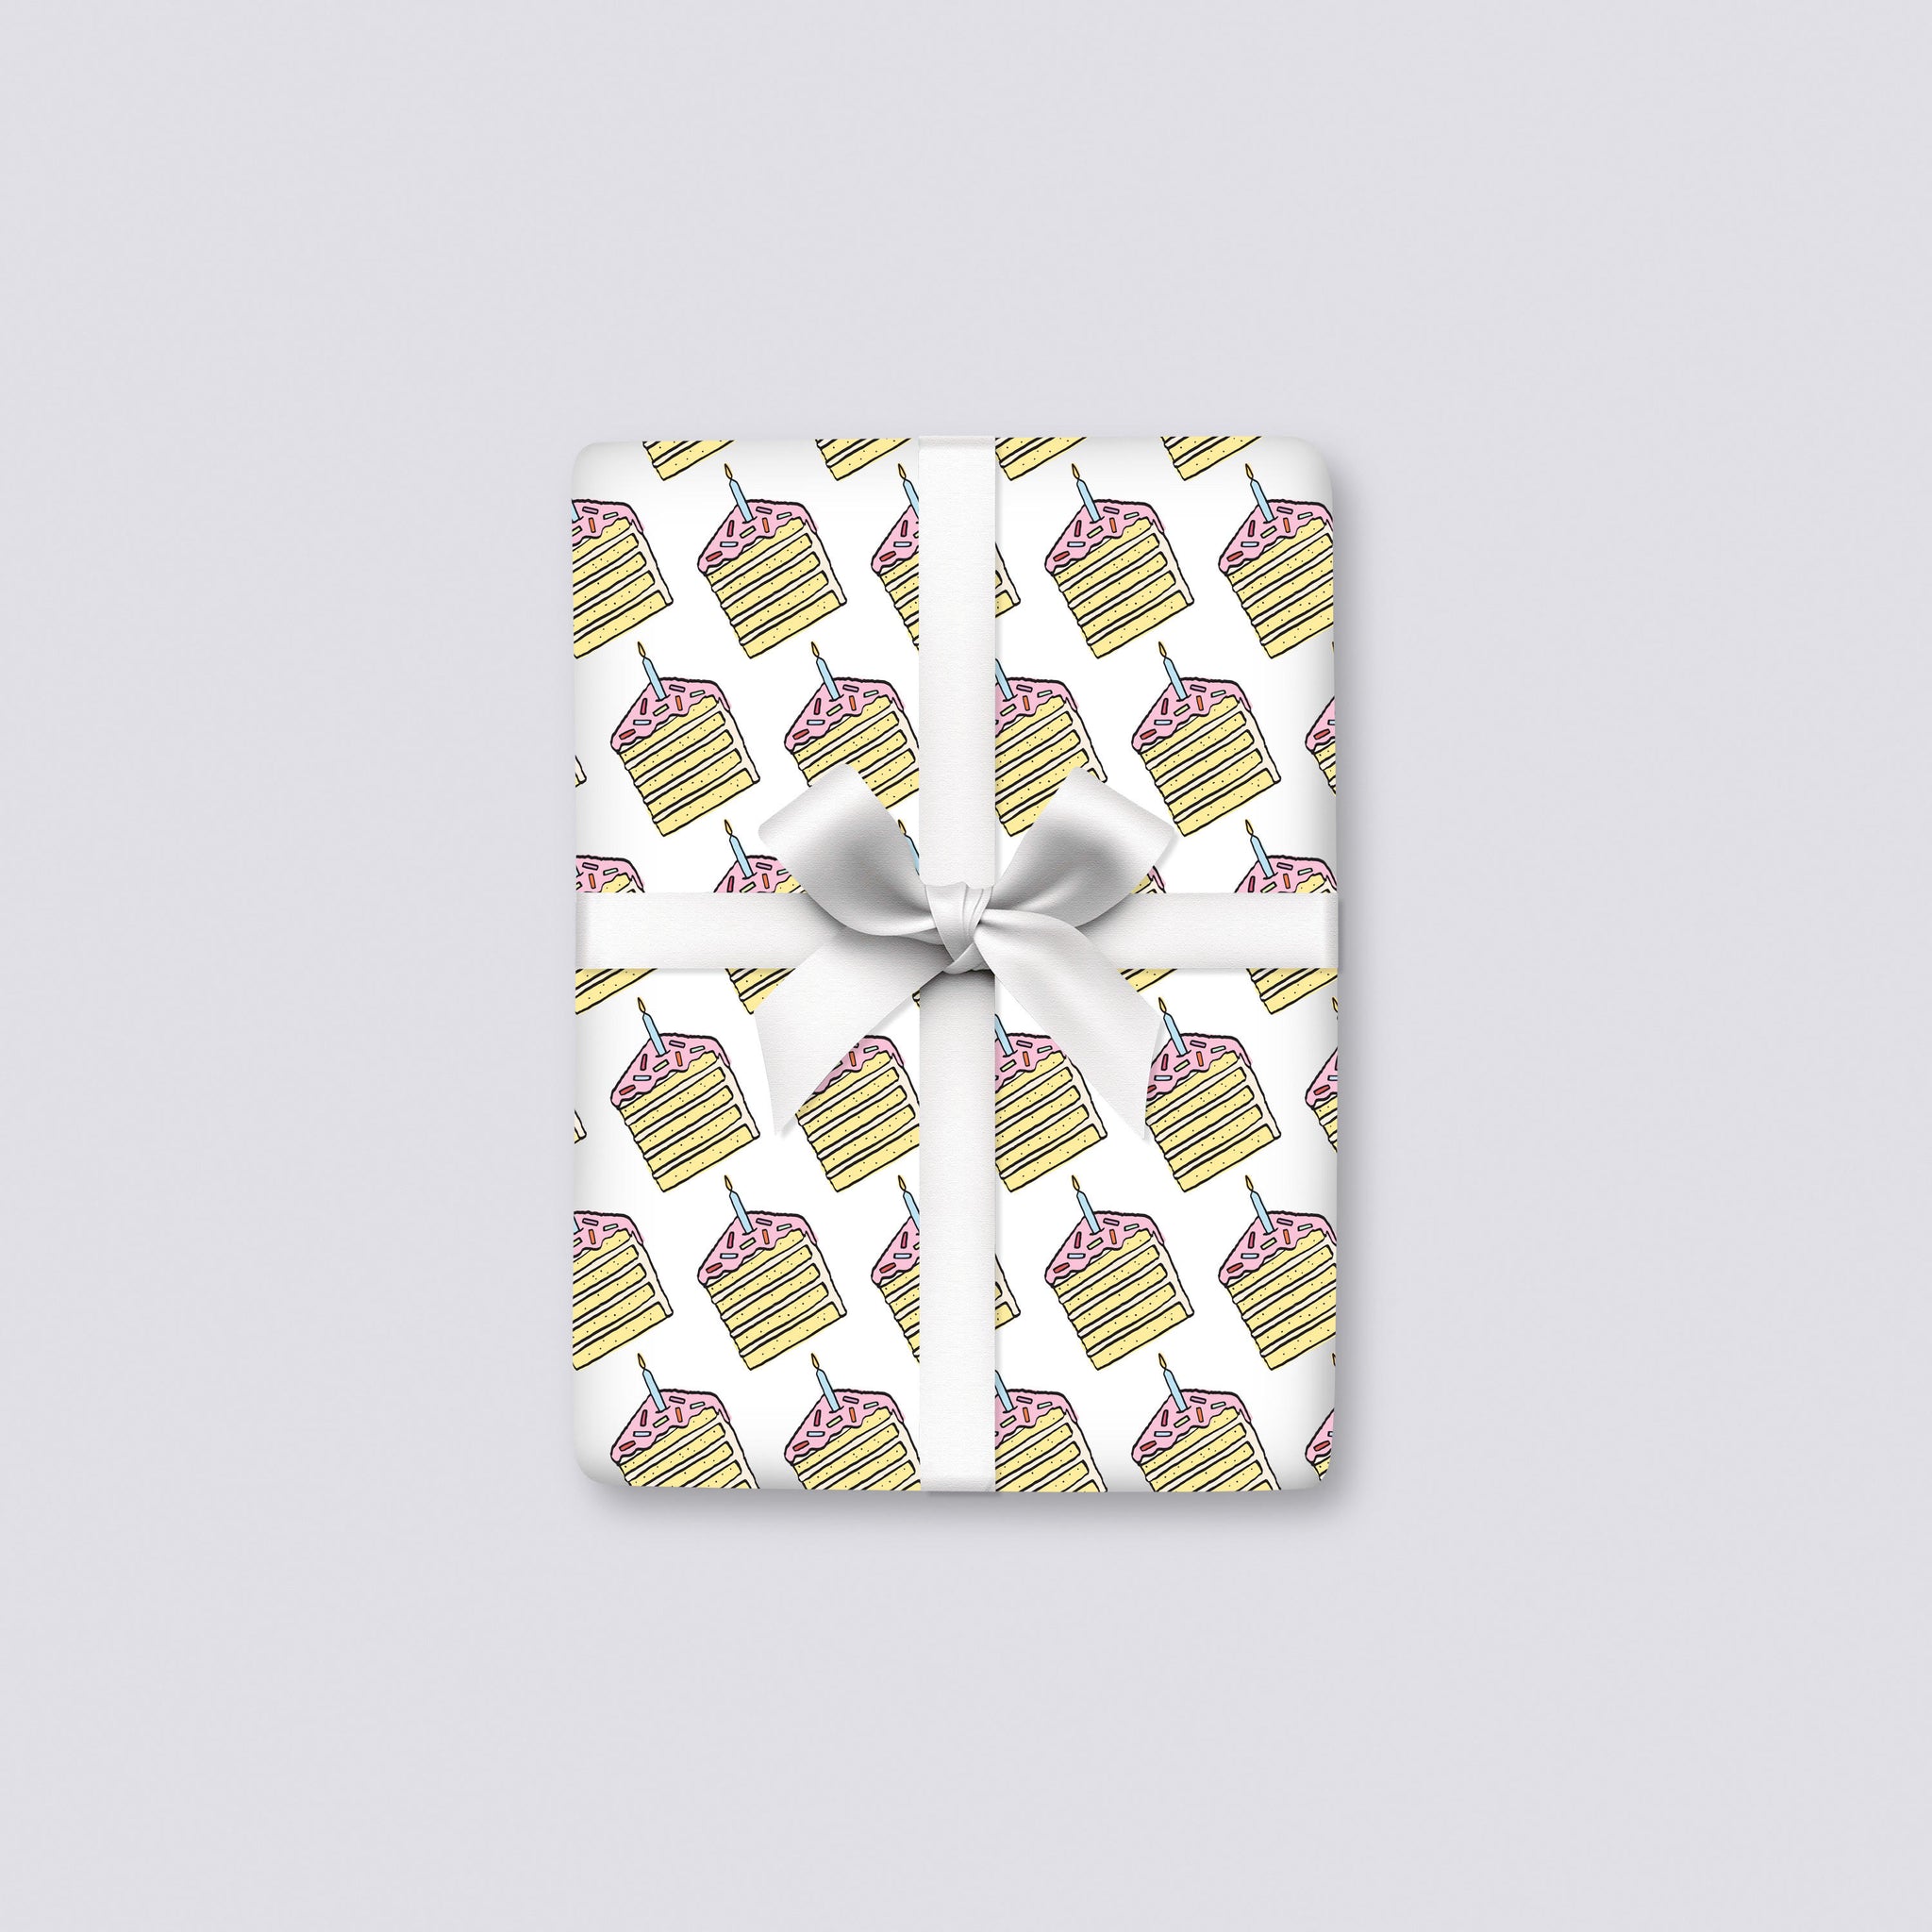 Piece of Cake Wrapping Paper